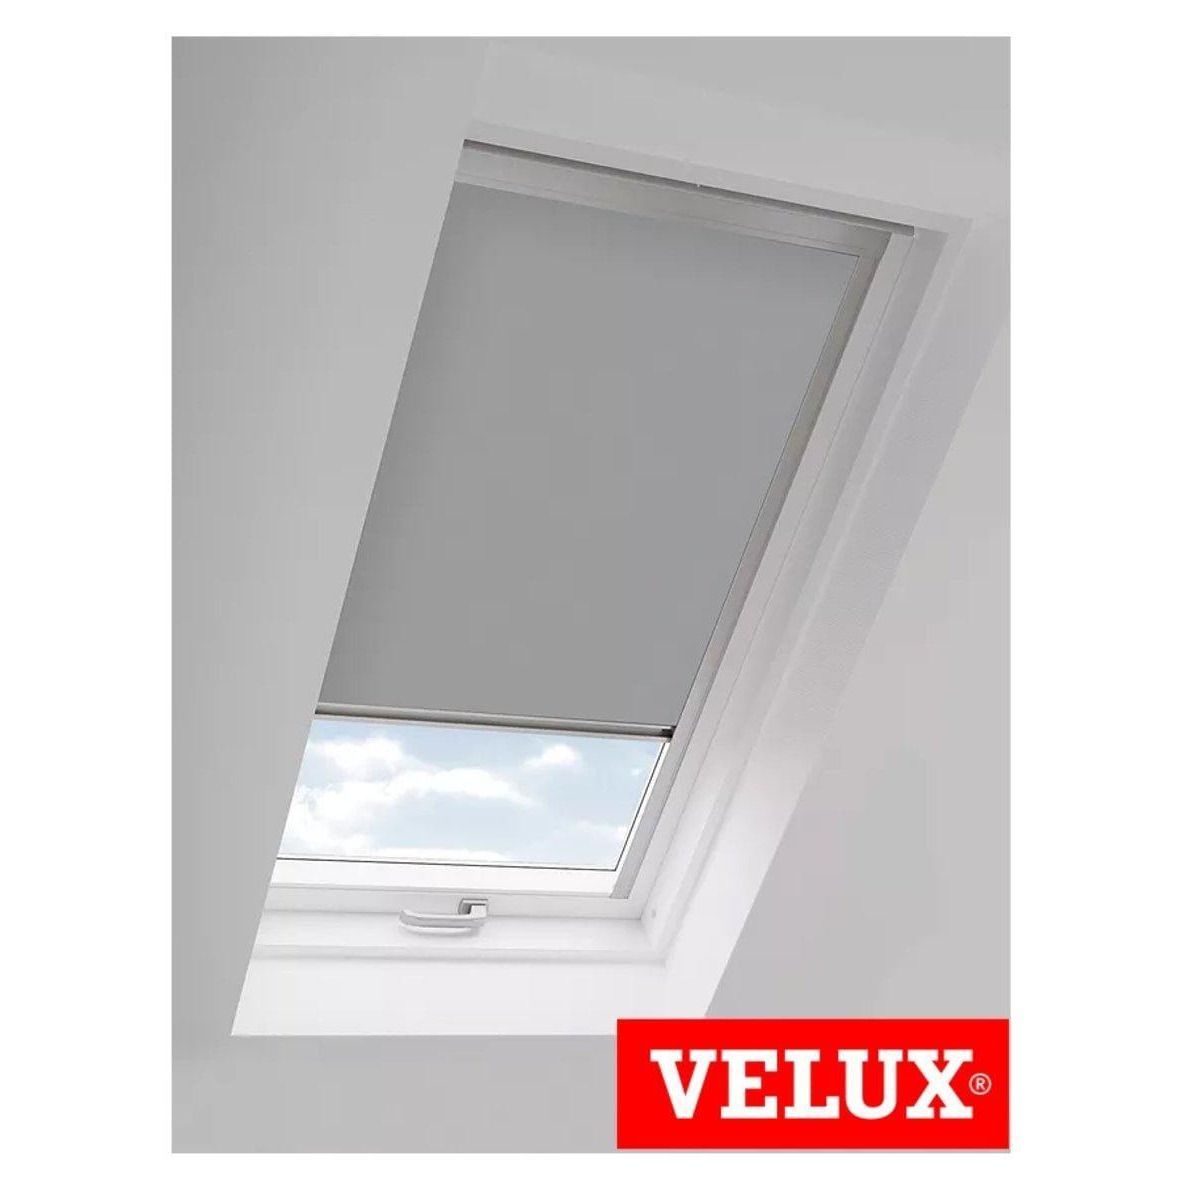 Flint Grey Thermal out Skylight Roller Blinds (Velux Roof Windows G Codes) - image 1